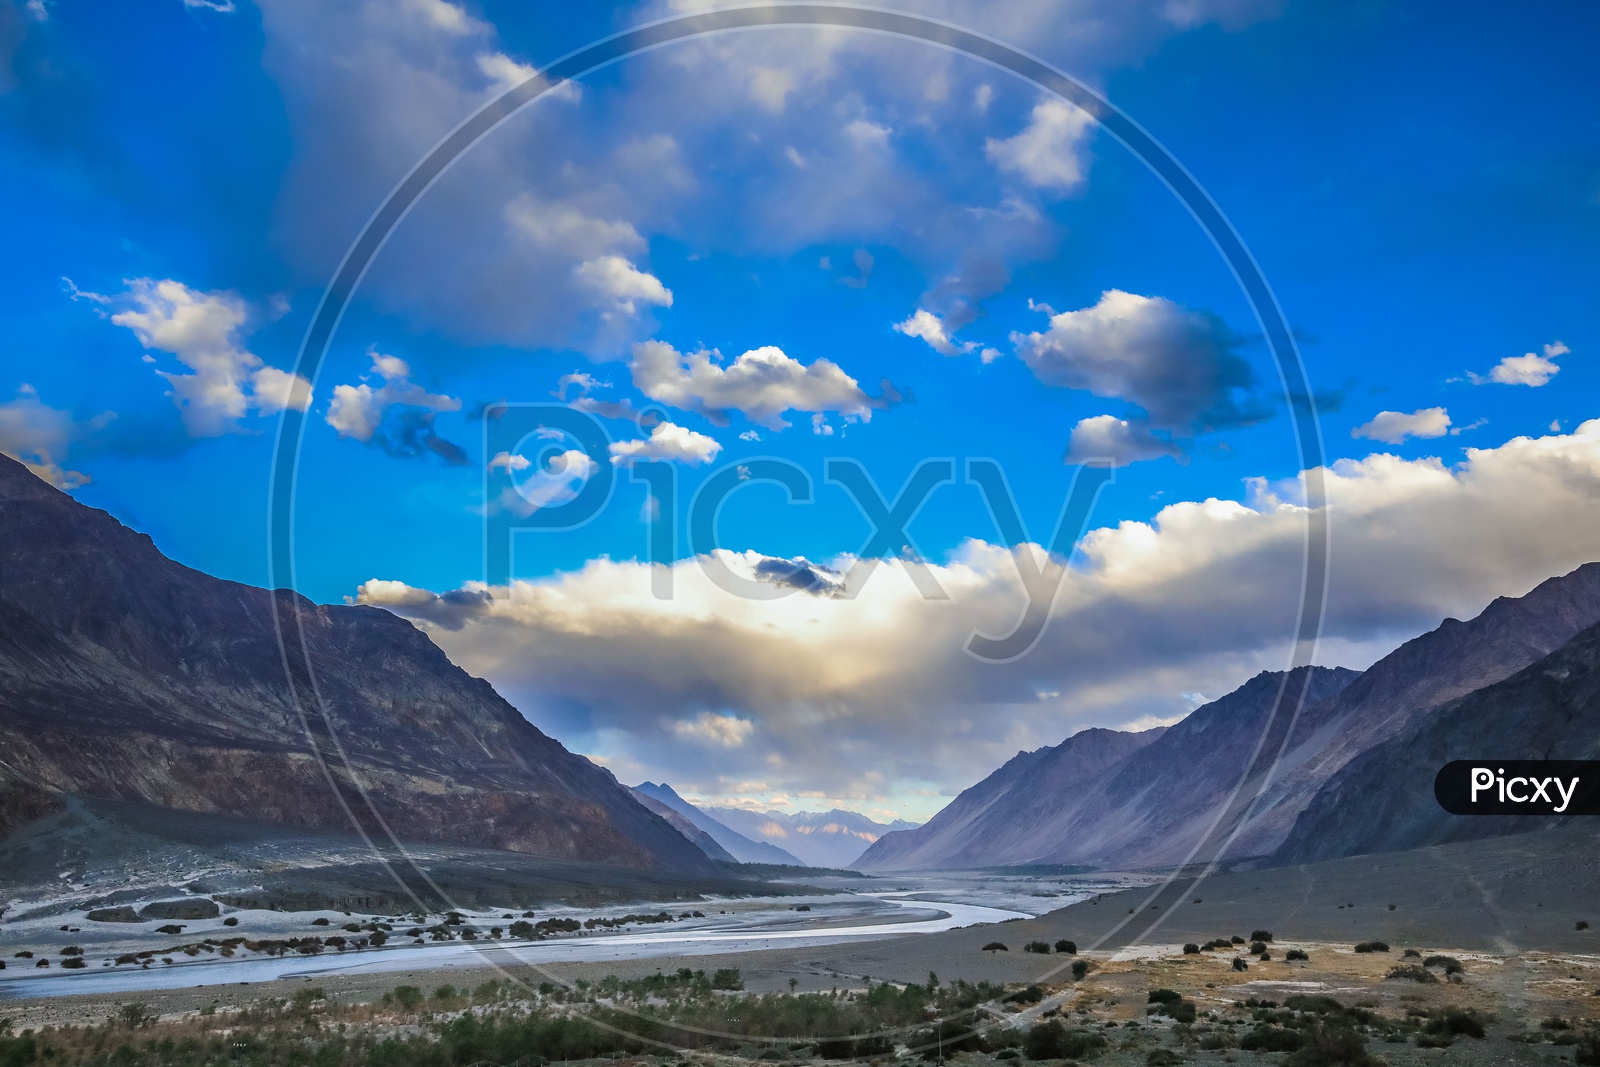 Landscape of a Zanskar river flowing through the mountains with blue sky and dramatic clouds in the background